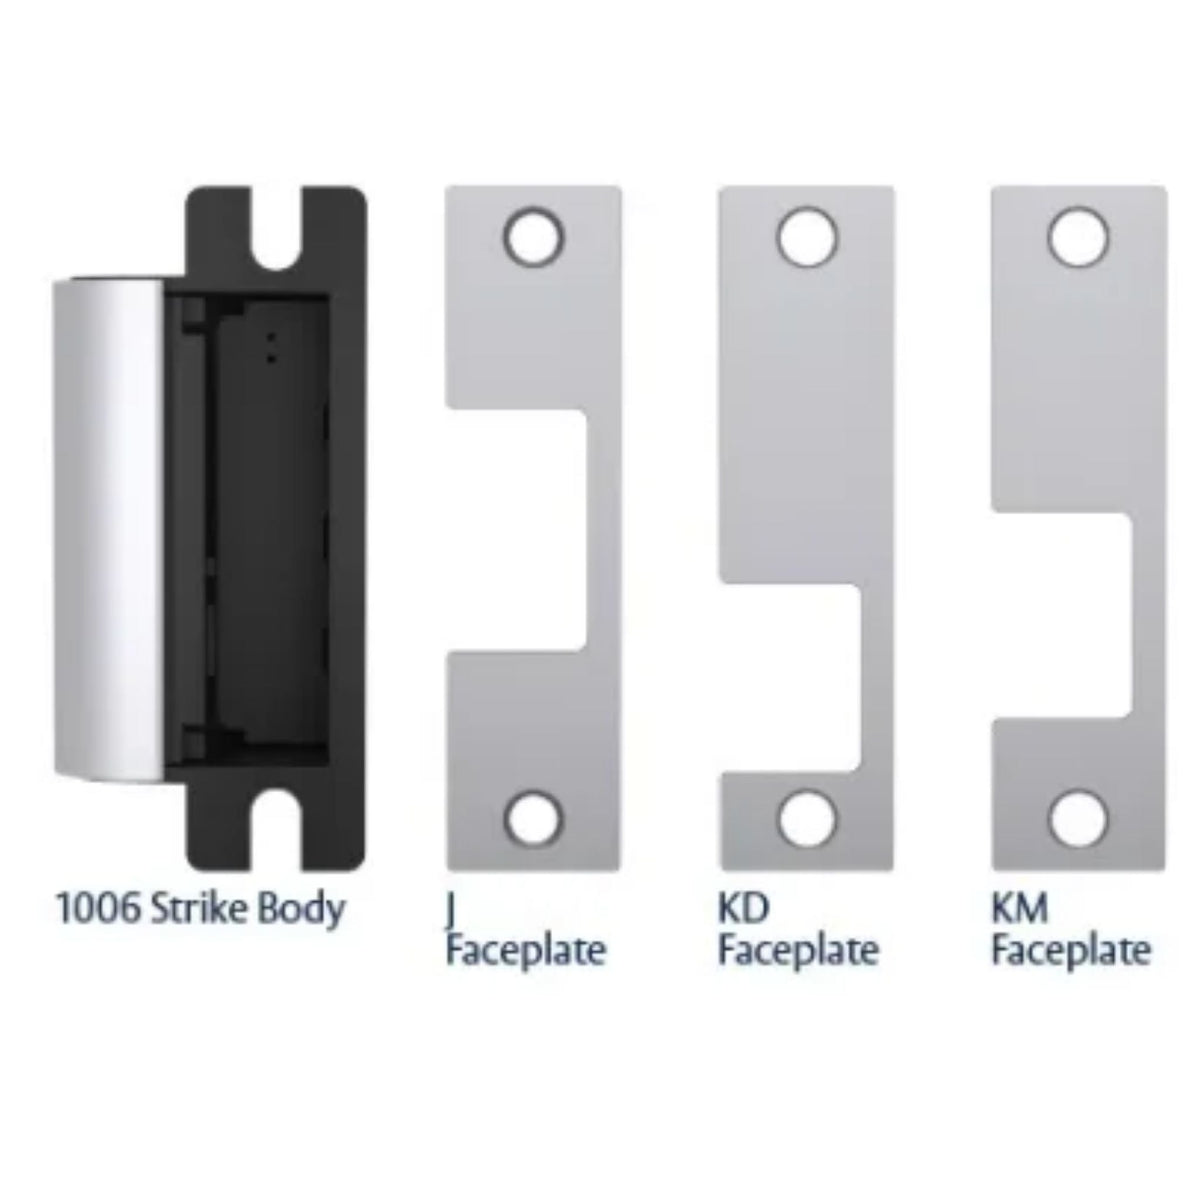 HES 1006CLB 630 Complete Pac Electric Strike Includes 1006 Strike Body, 3 Faceplates (J-Option, KD-Option &amp; KM-Option) and All Mounting Hardware Satin Stainless Steel Electric Strikes Fail Secure or Fail Safe Strikes - The Lock Source